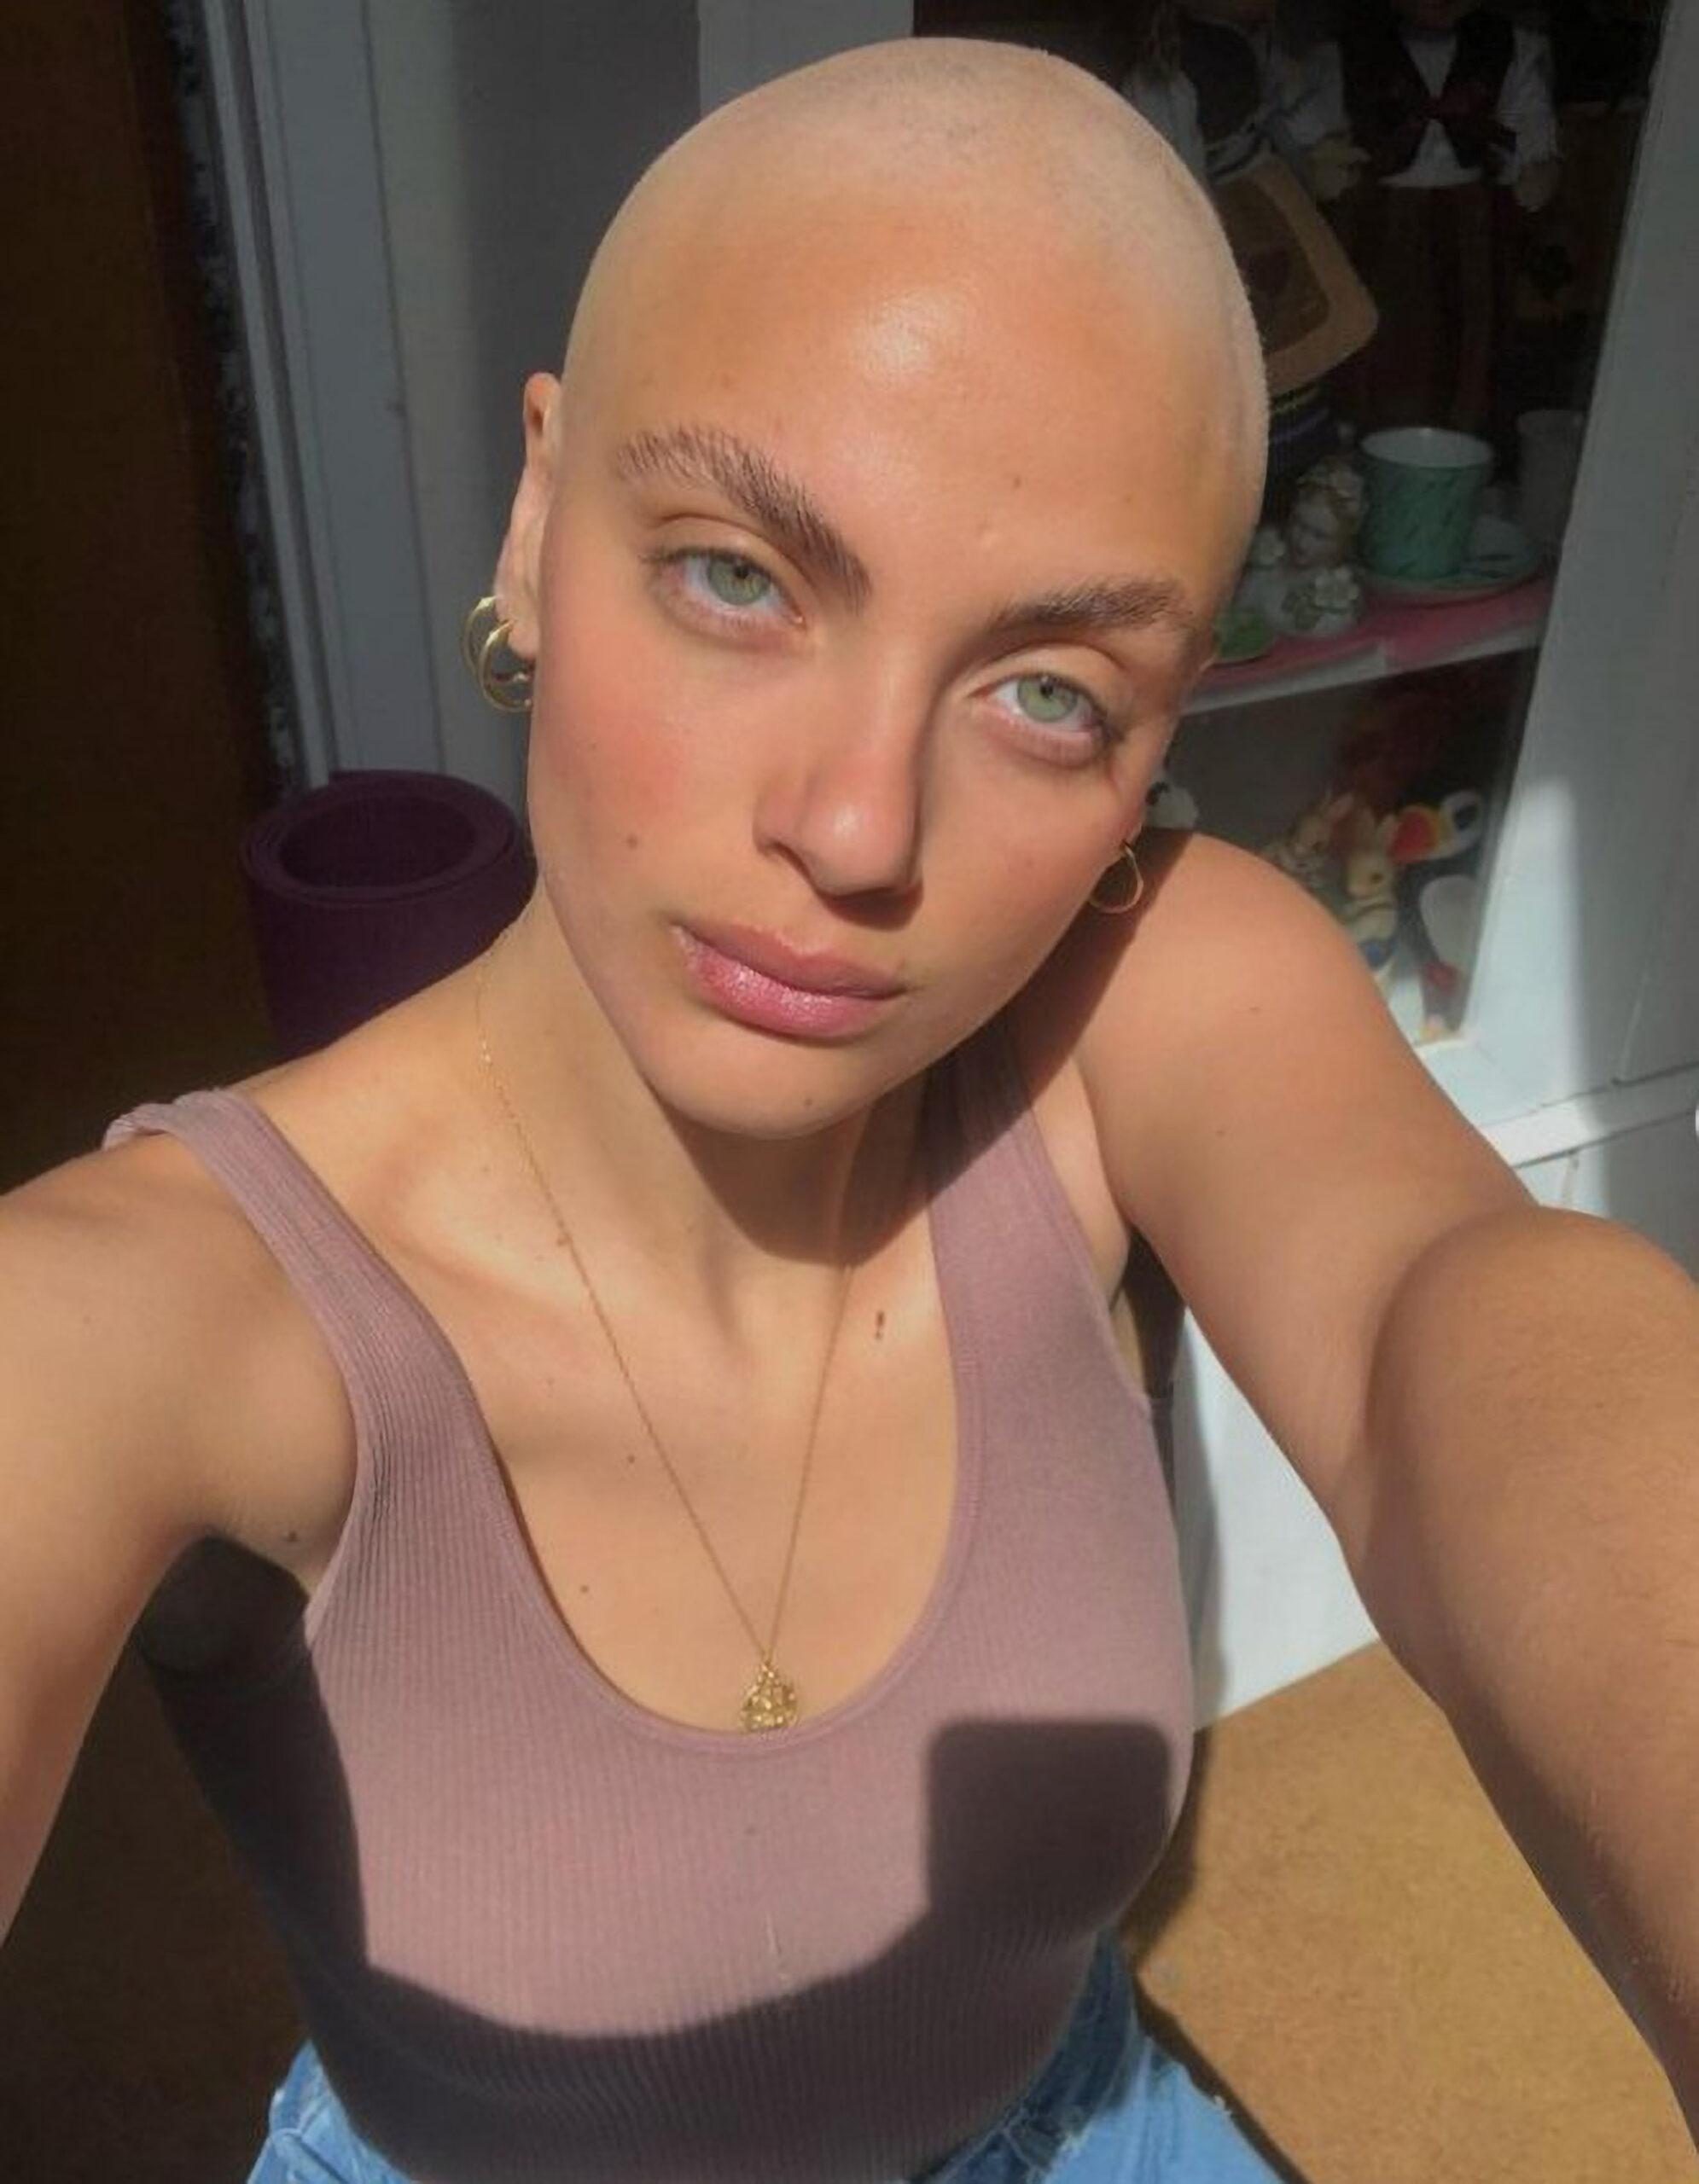 BALD IS BEAUTIFUL: Model Shaves Head After…